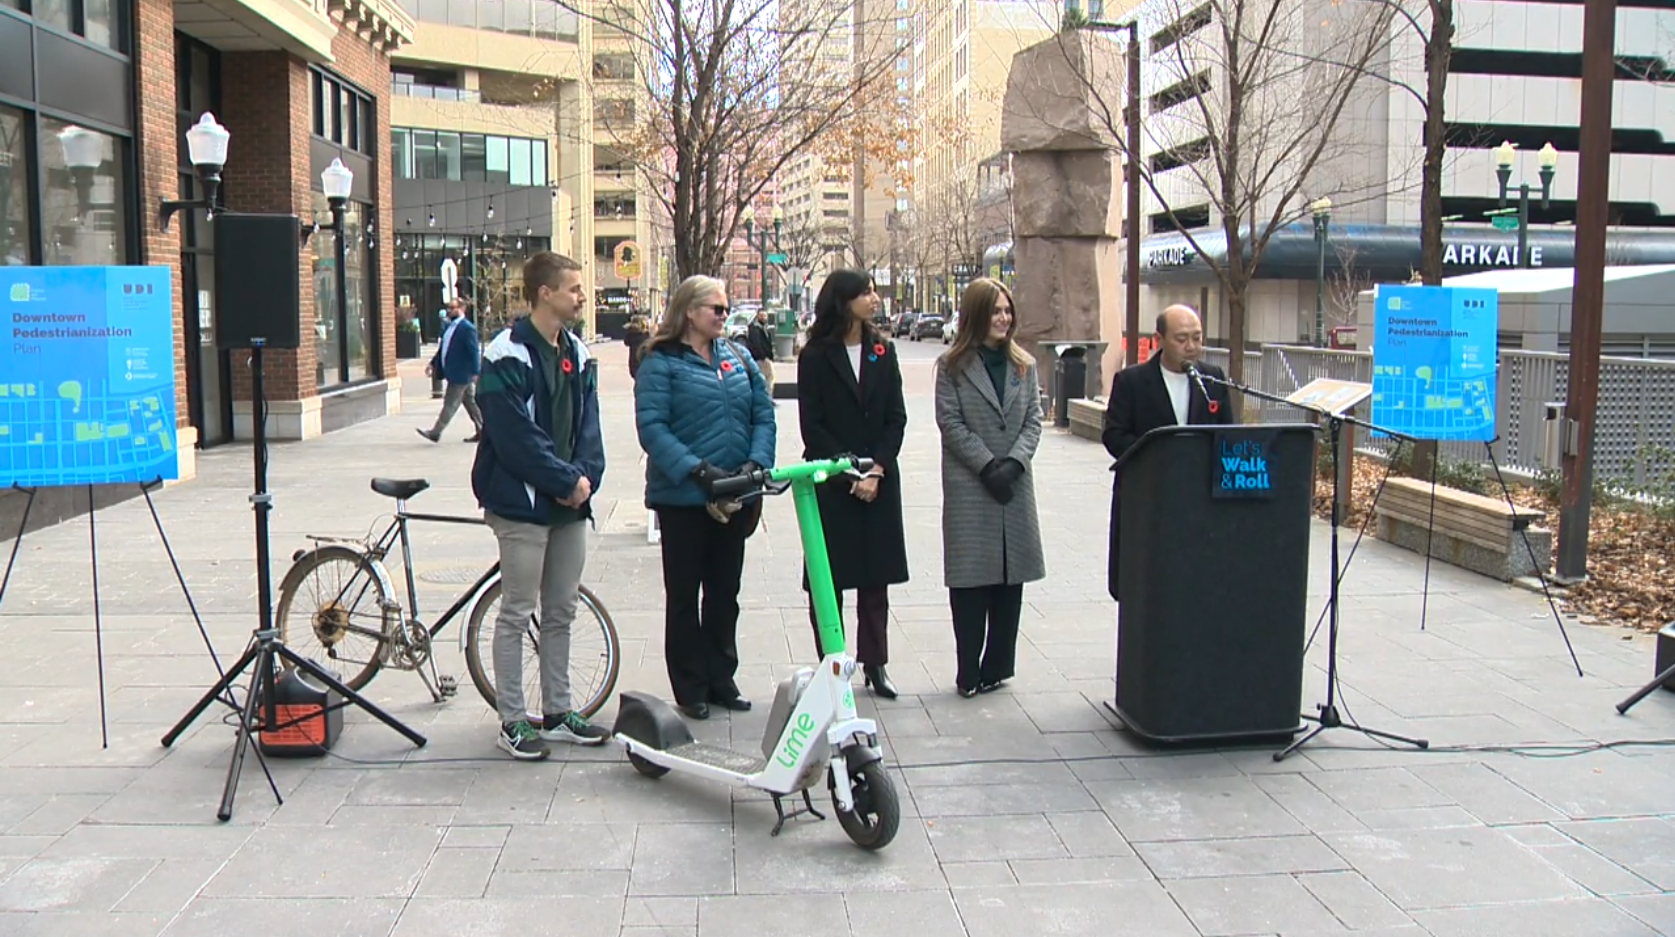 Edmonton groups pushing to make downtown friendlier to pedestrians, cyclists